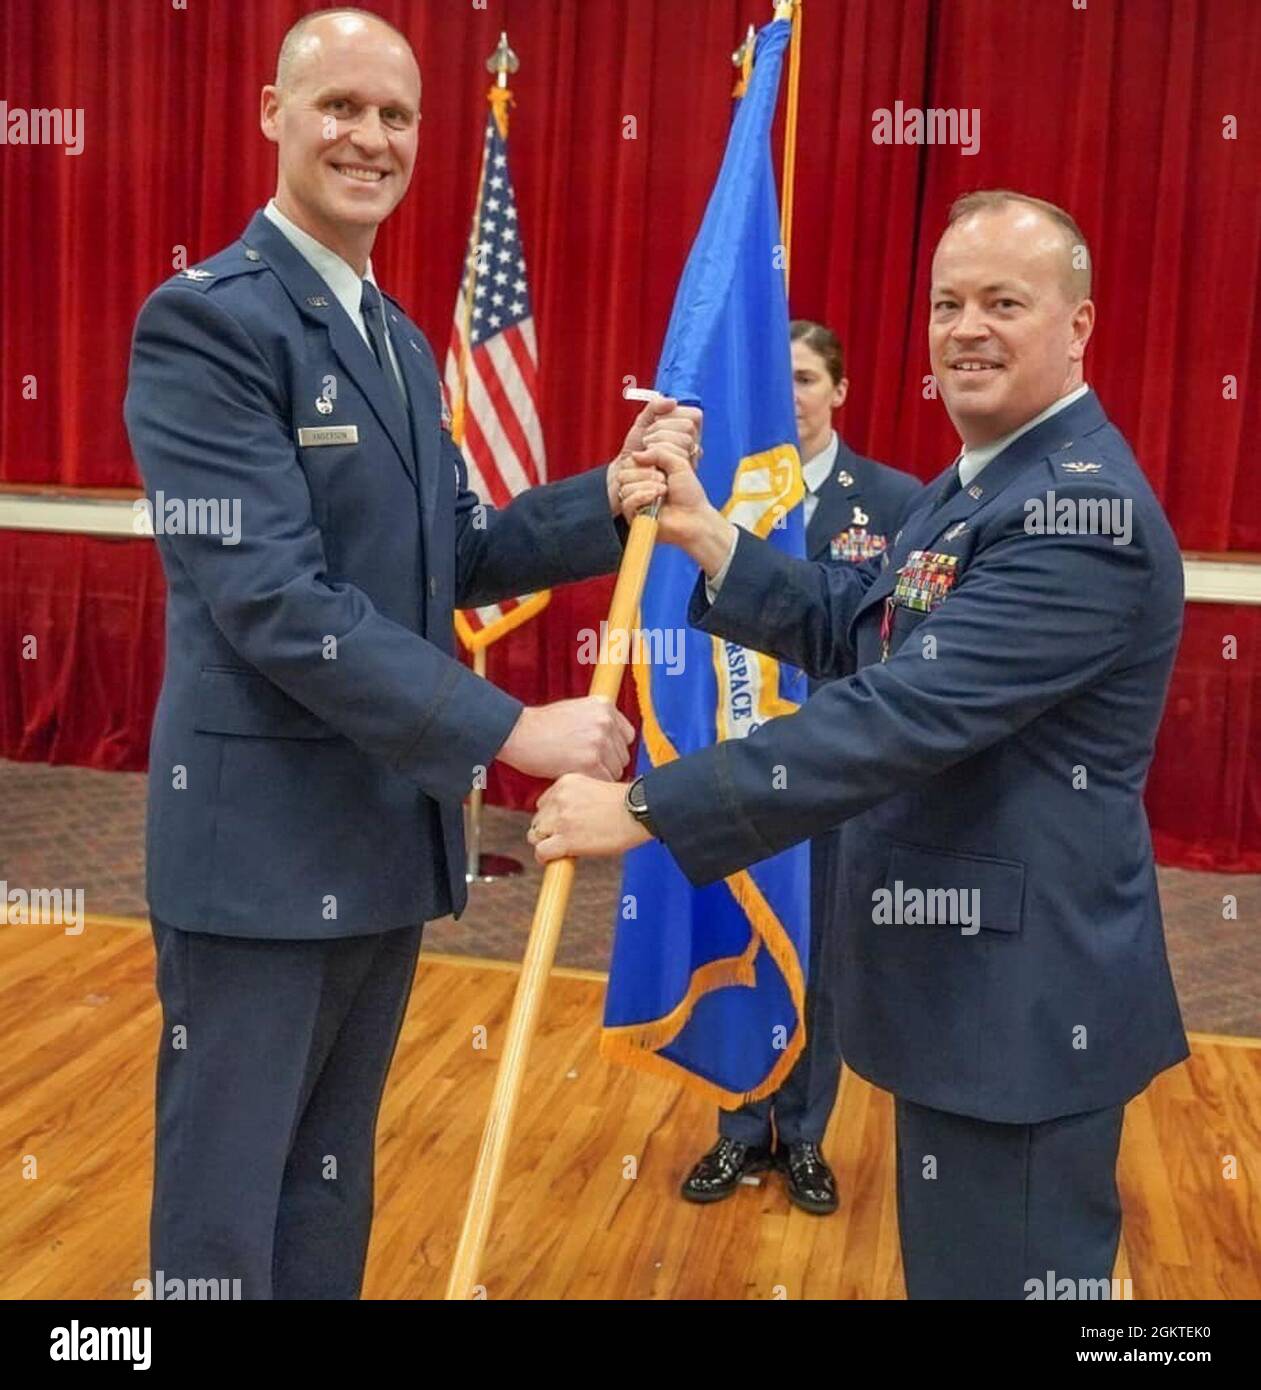 Col. Kevin Kirsch relinquishes the Group flag to Col. Steven Anderson, 688th Cyberspace Commander during the 690th Cyberspace Operations Group Commander and 688th Cyberspace Wing A2/A3 Director Change of Command Ceremony June 29, 2021 at Arnold Hall, Joint Base San Antonio-Lackland, Texas. Col. Kevin Kirsch transferred command to Col. Billy Pope. Stock Photo